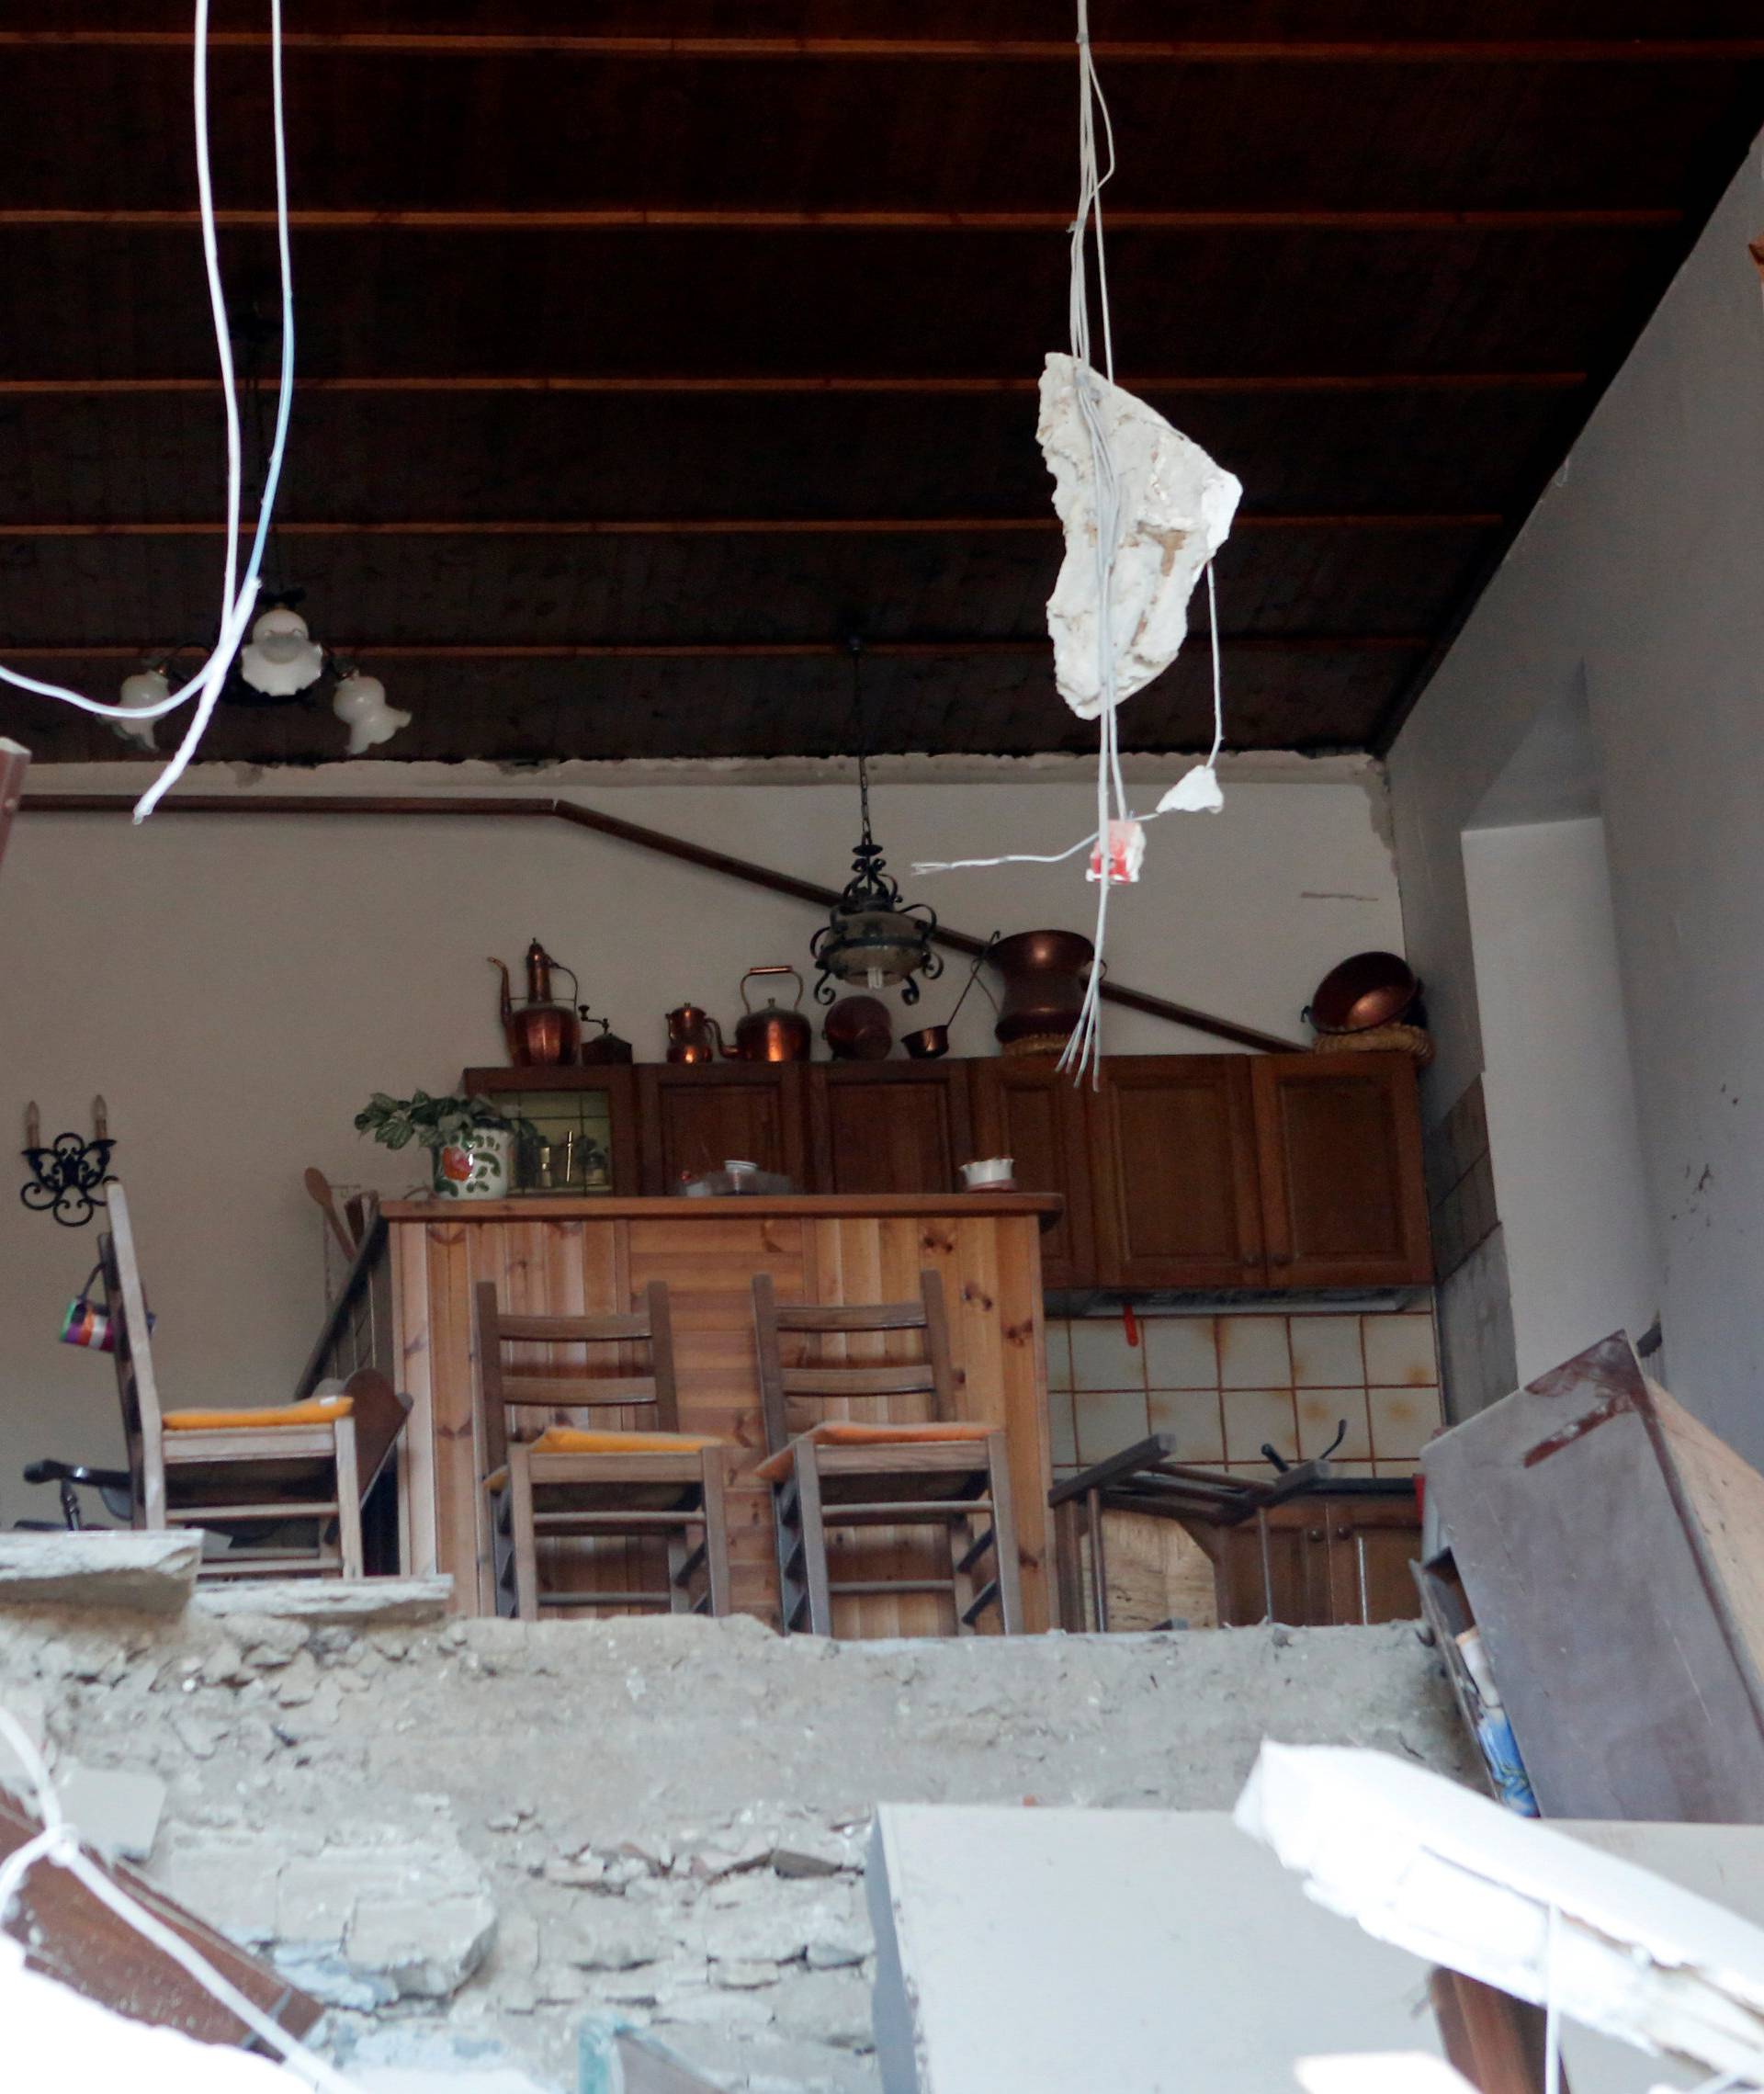 The interior of a house is seen following a quake in Amatrice